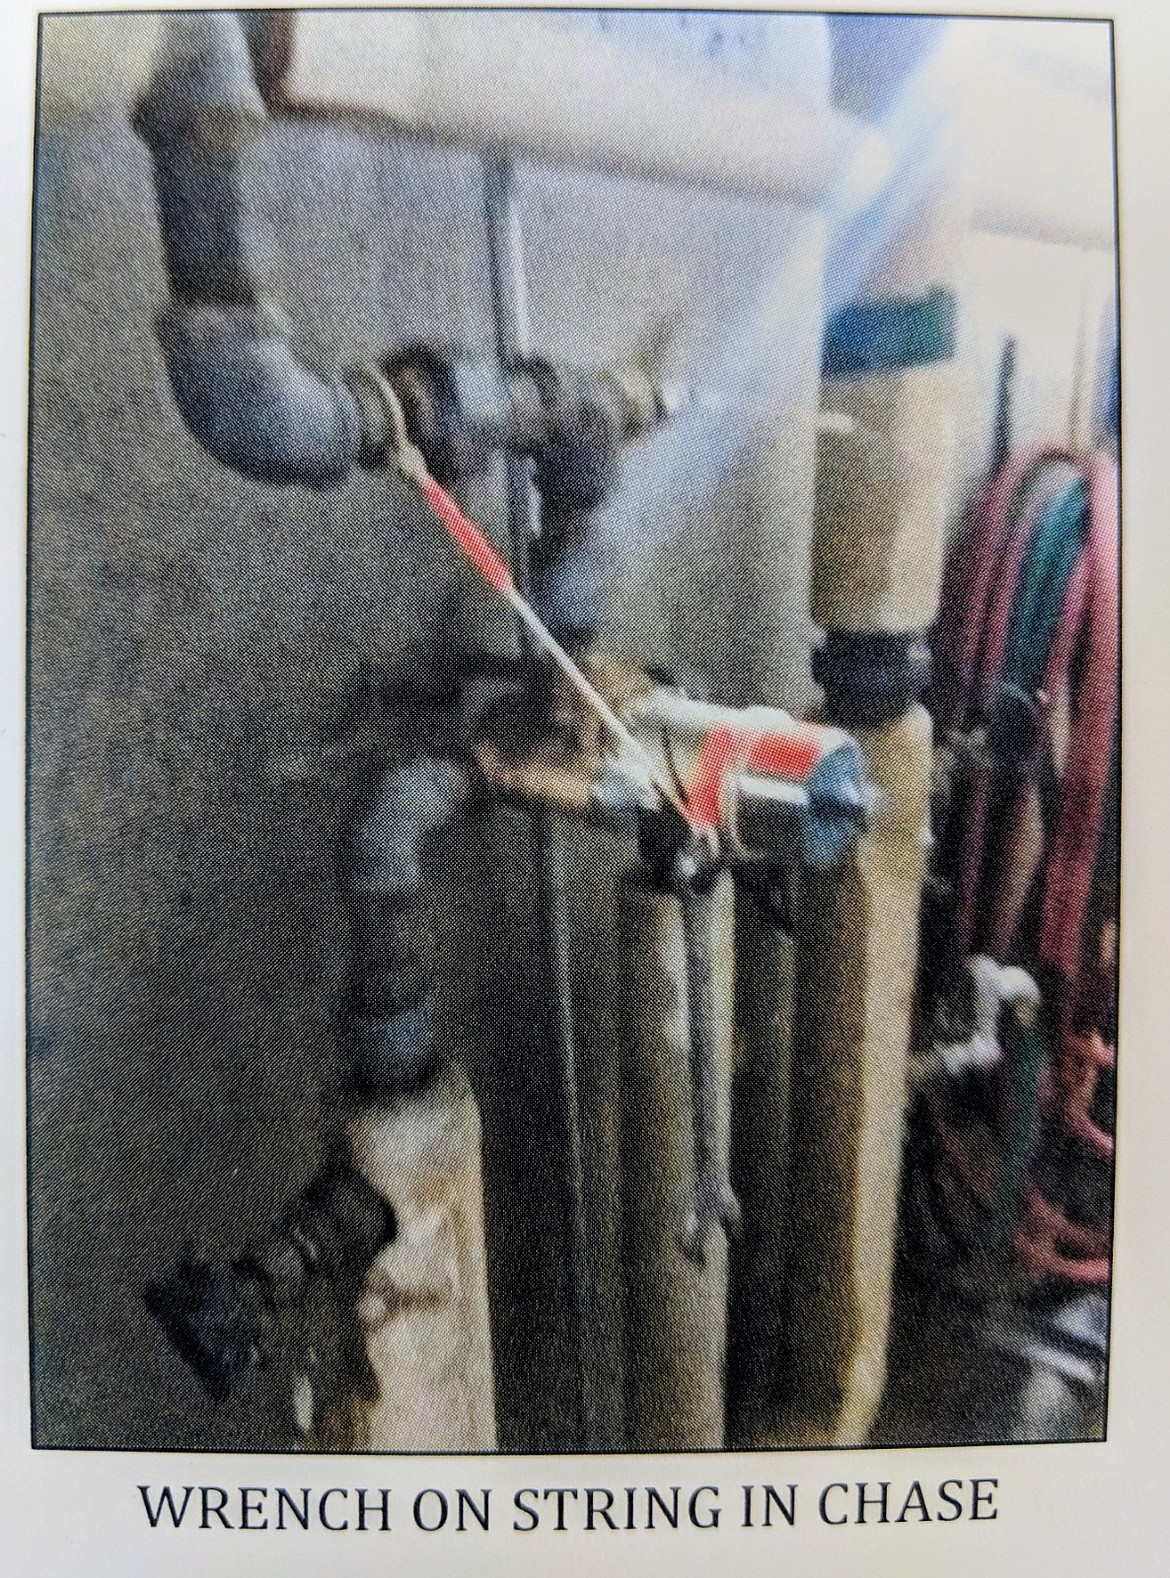 Courtesy photo
The wrench on a string mentioned in the report that is available to employees to adjust a leaky pipe, located in one of the chases between cell blocks.